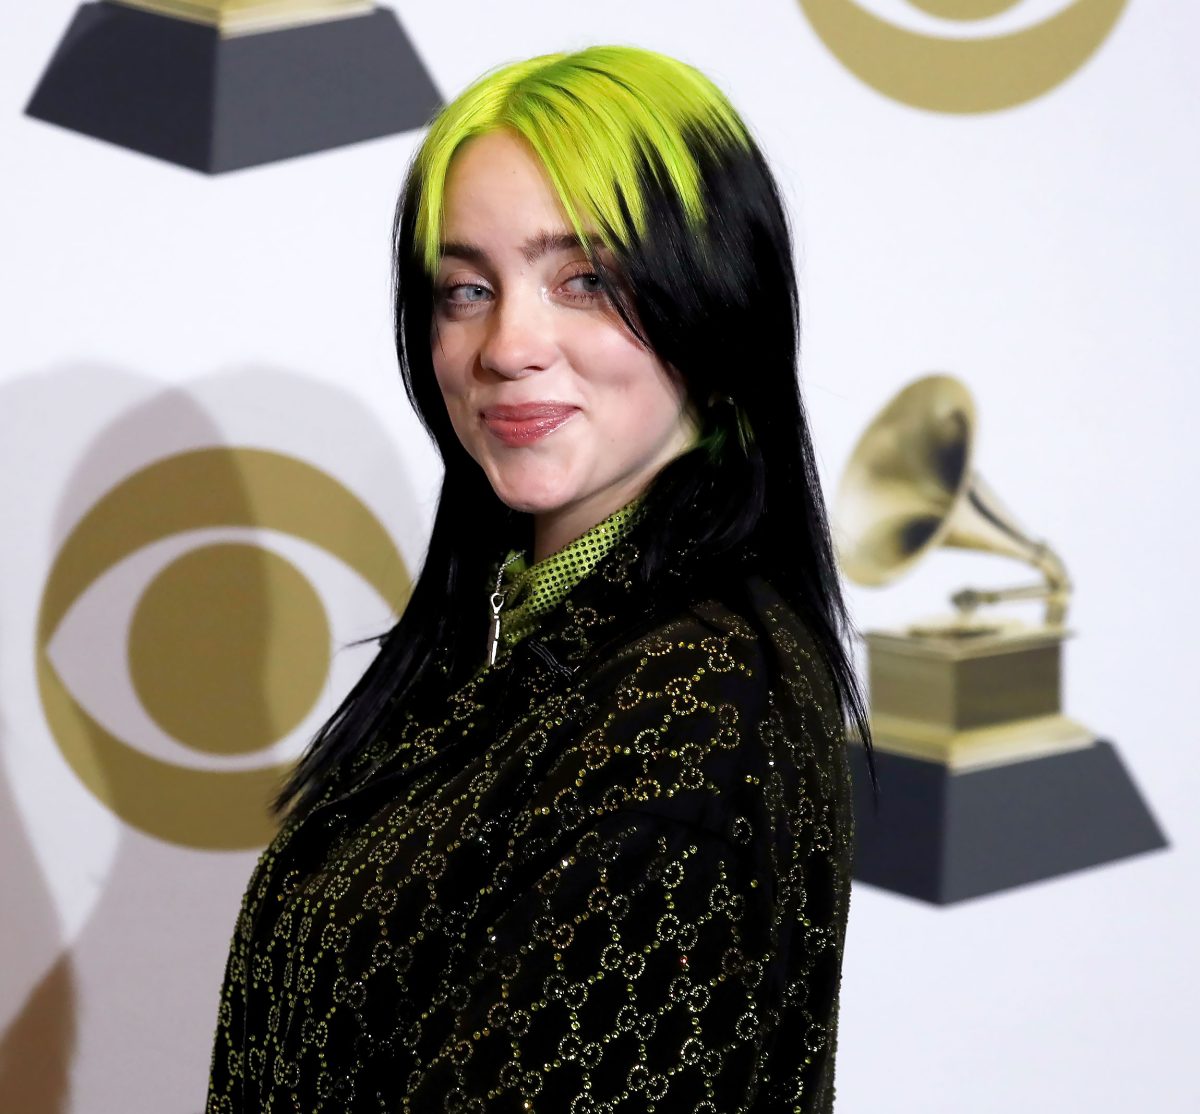 Billie Eilish Claps Back At Haters Who Make Fun Of Her Hair Us Weekly 0121